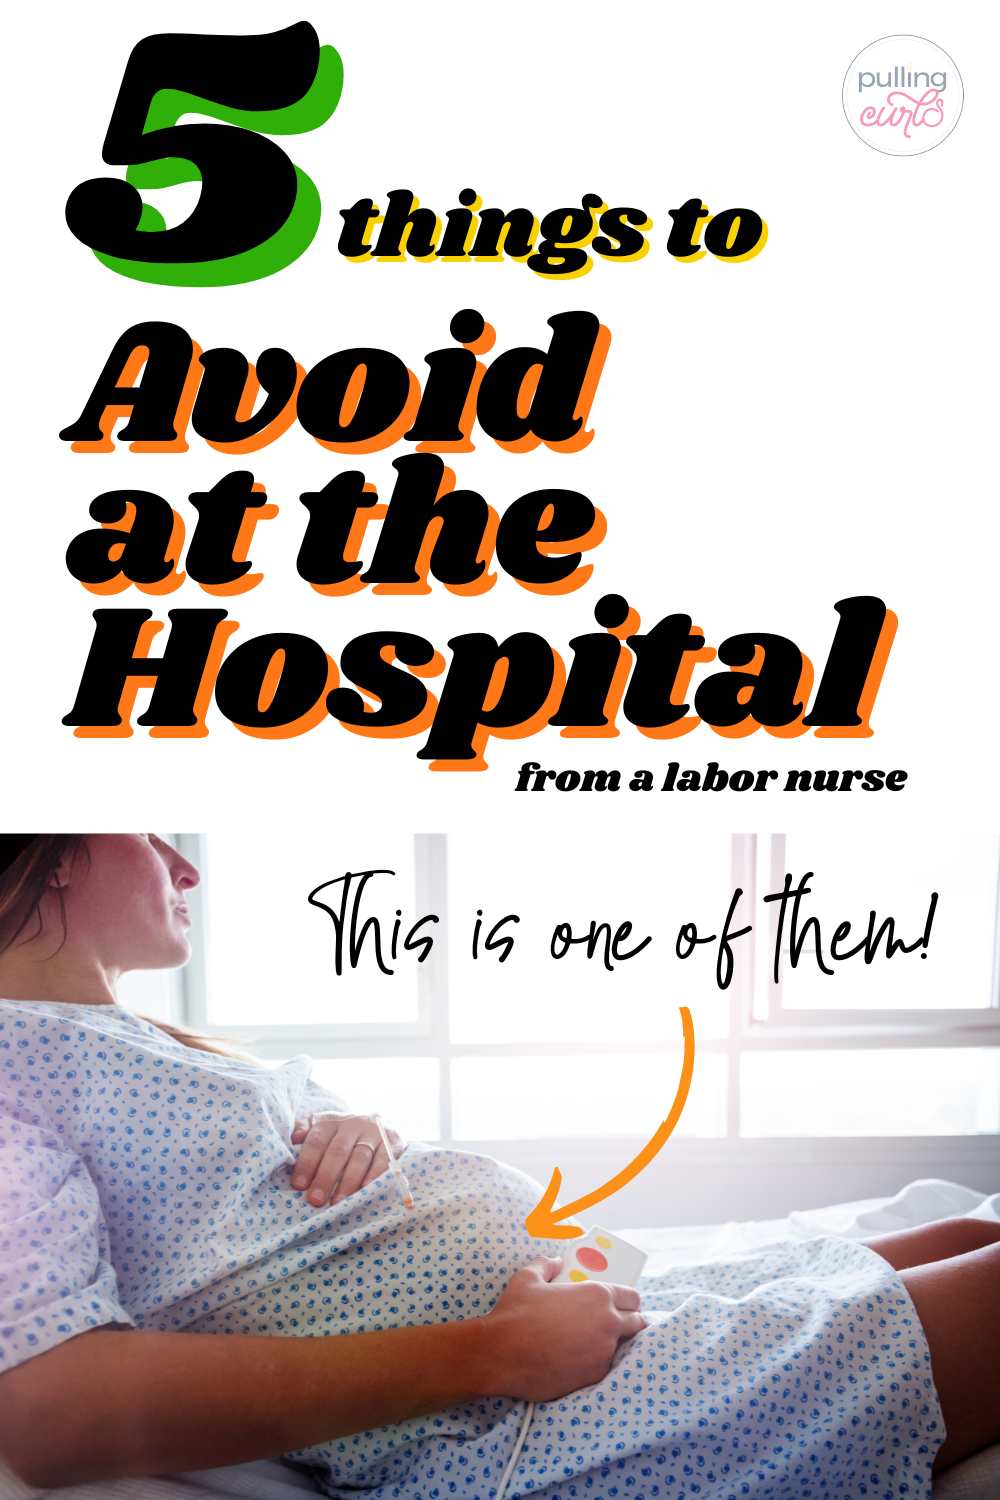 5 things to avoid in labor and deliver y / pregnant woman in hospital bed via @pullingcurls